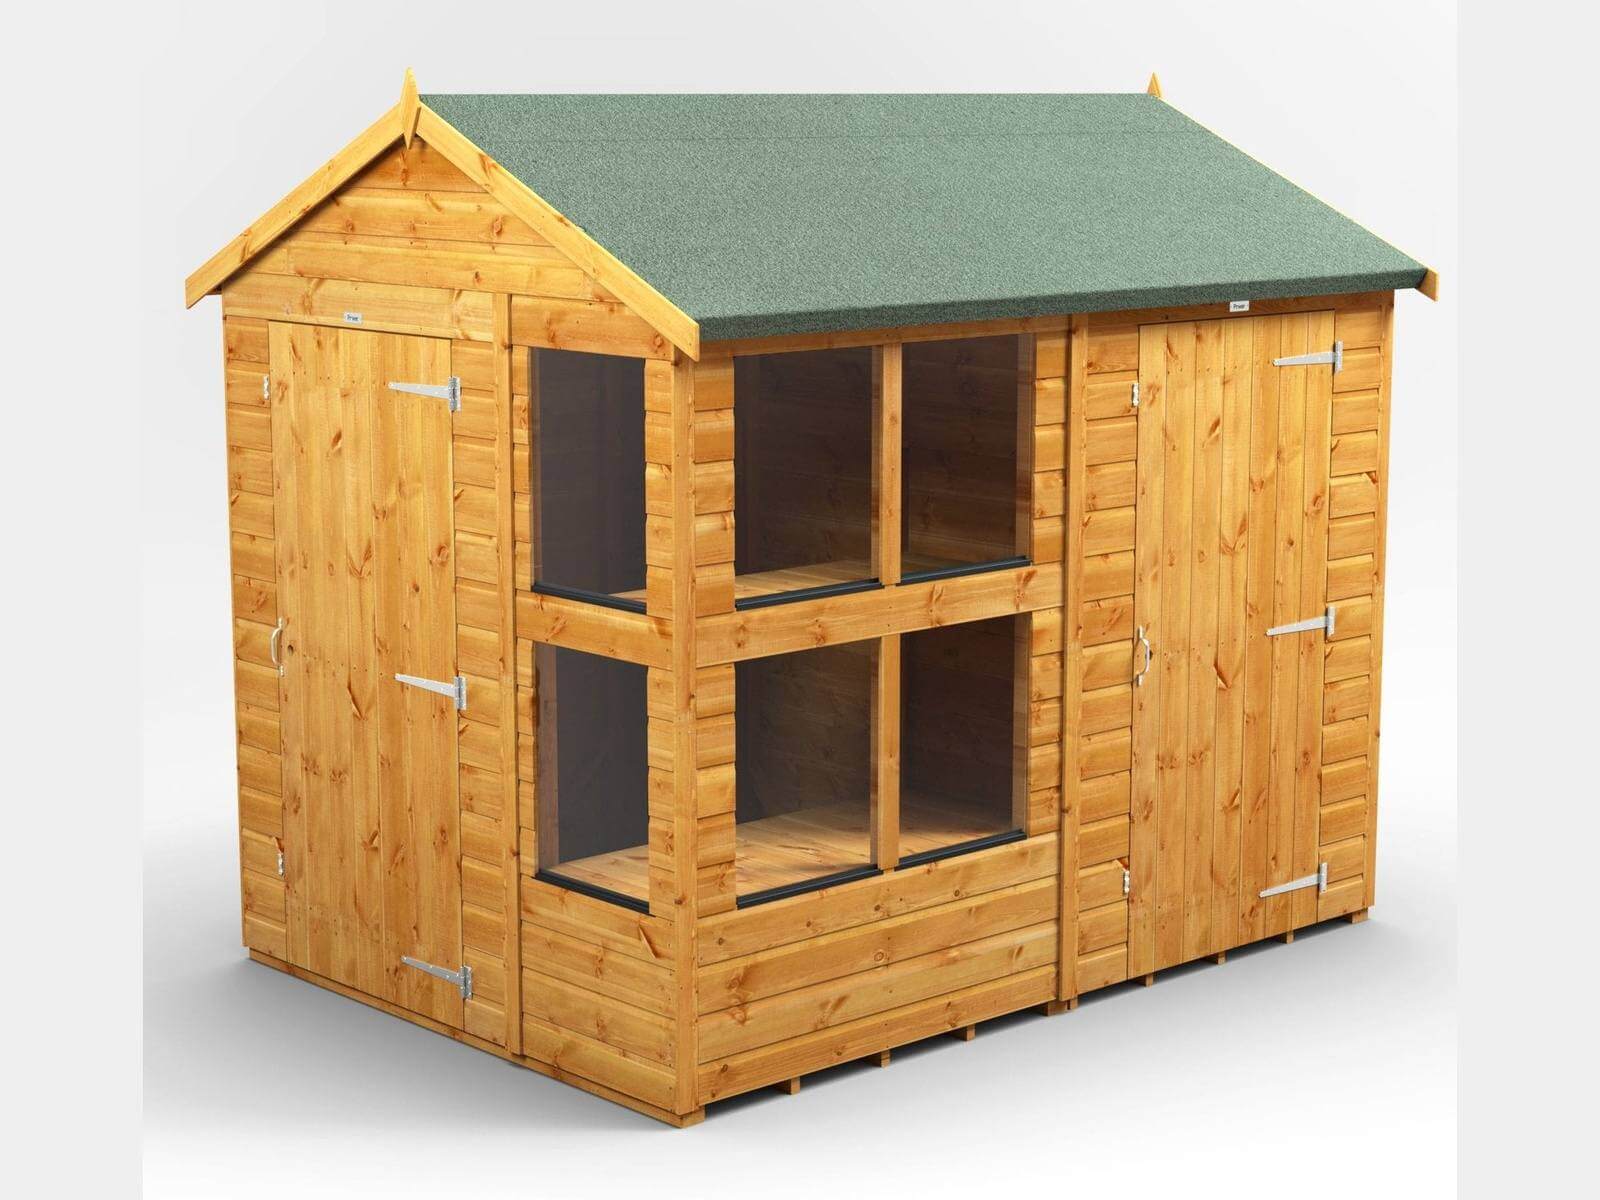 Power Apex Wooden Potting Shed Combi Various Sizes Shed Sizes: 8x6 (includes 4ft Side Store)